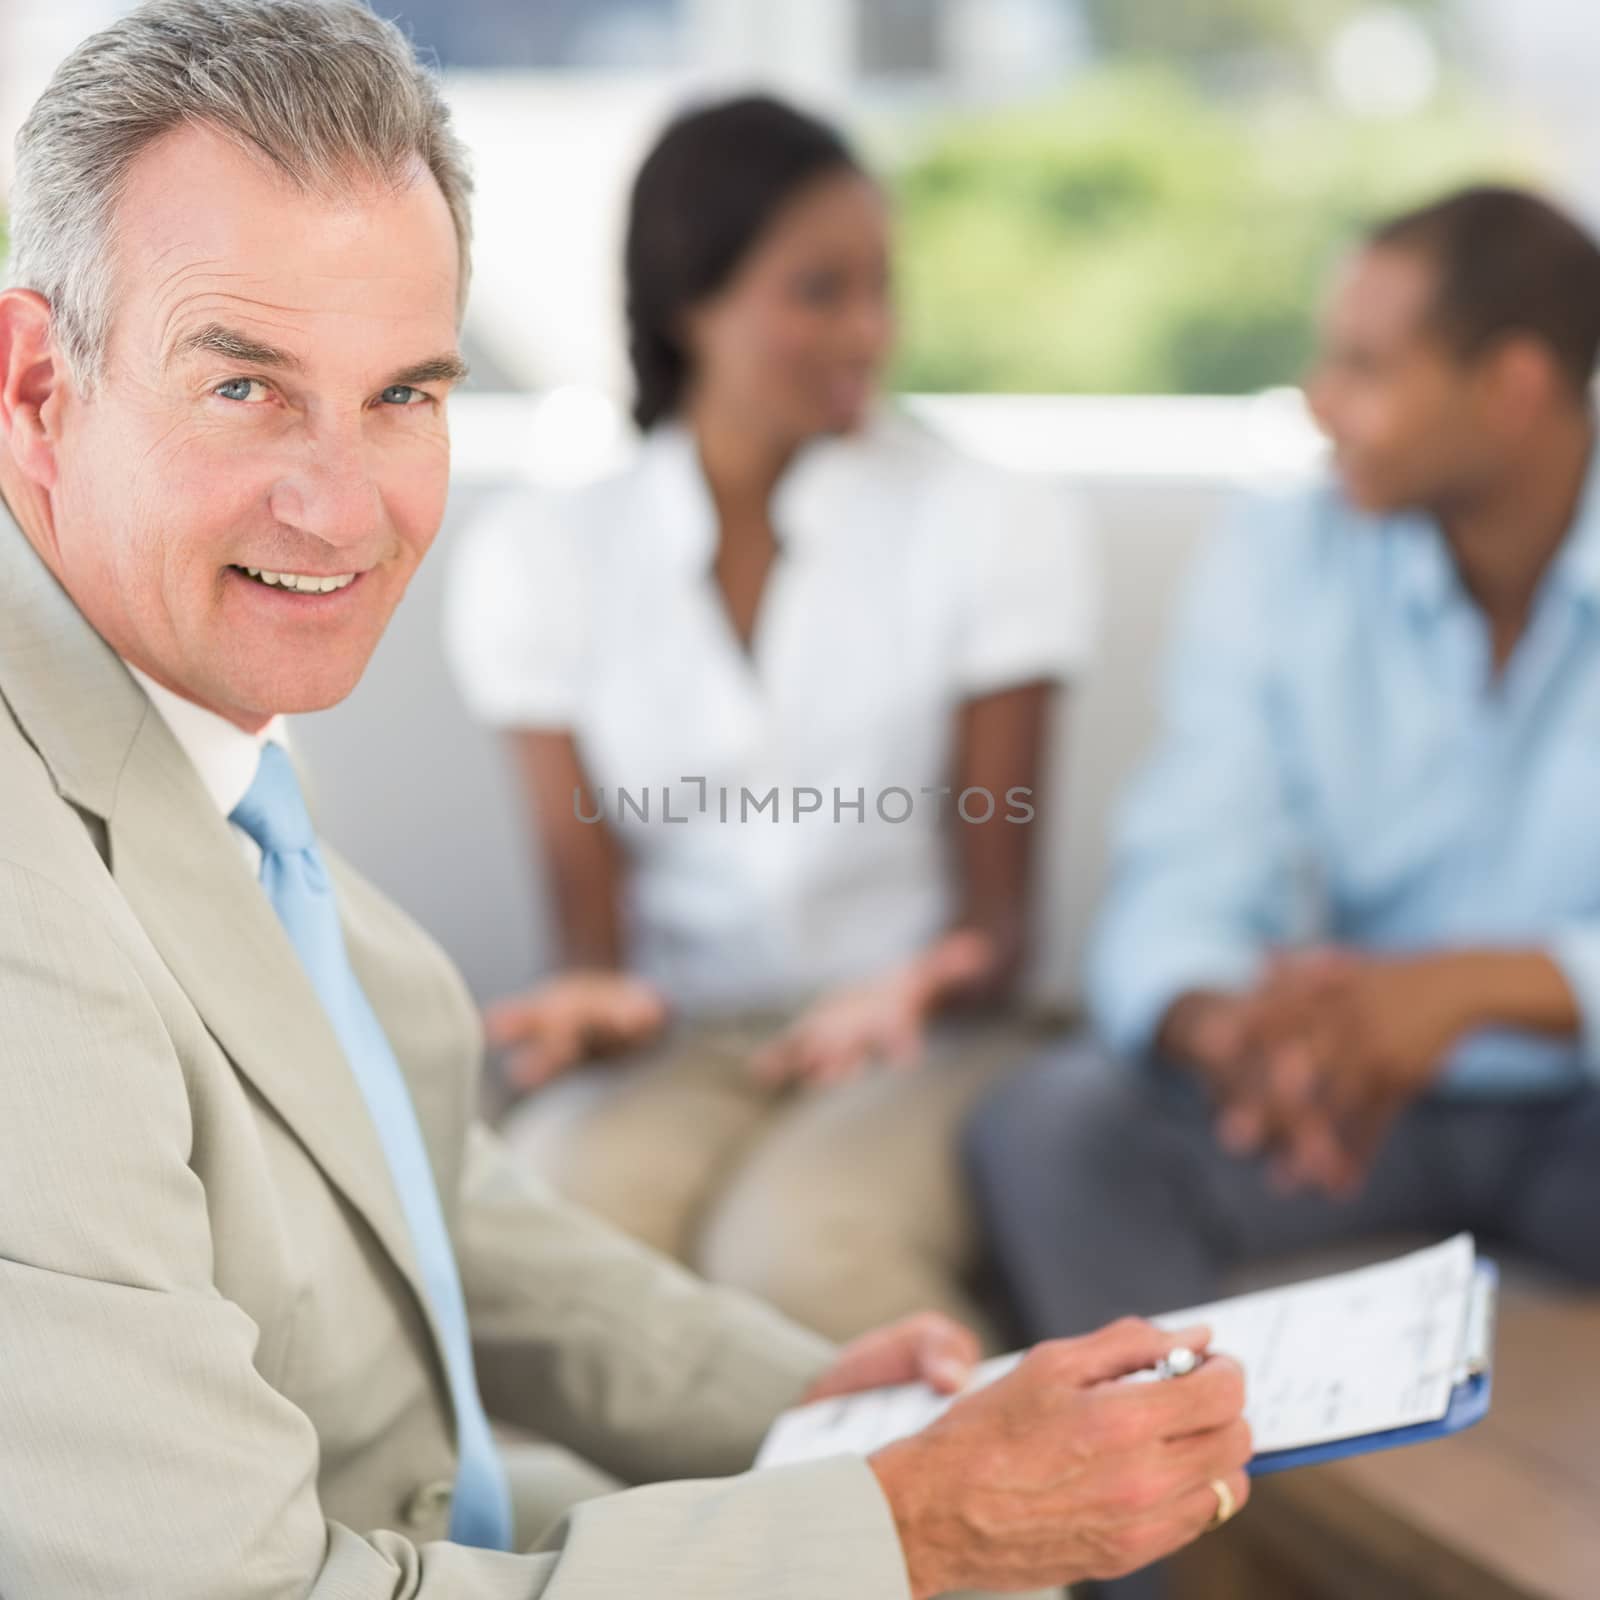 Salesman smiling at camera with couple behind him in the office